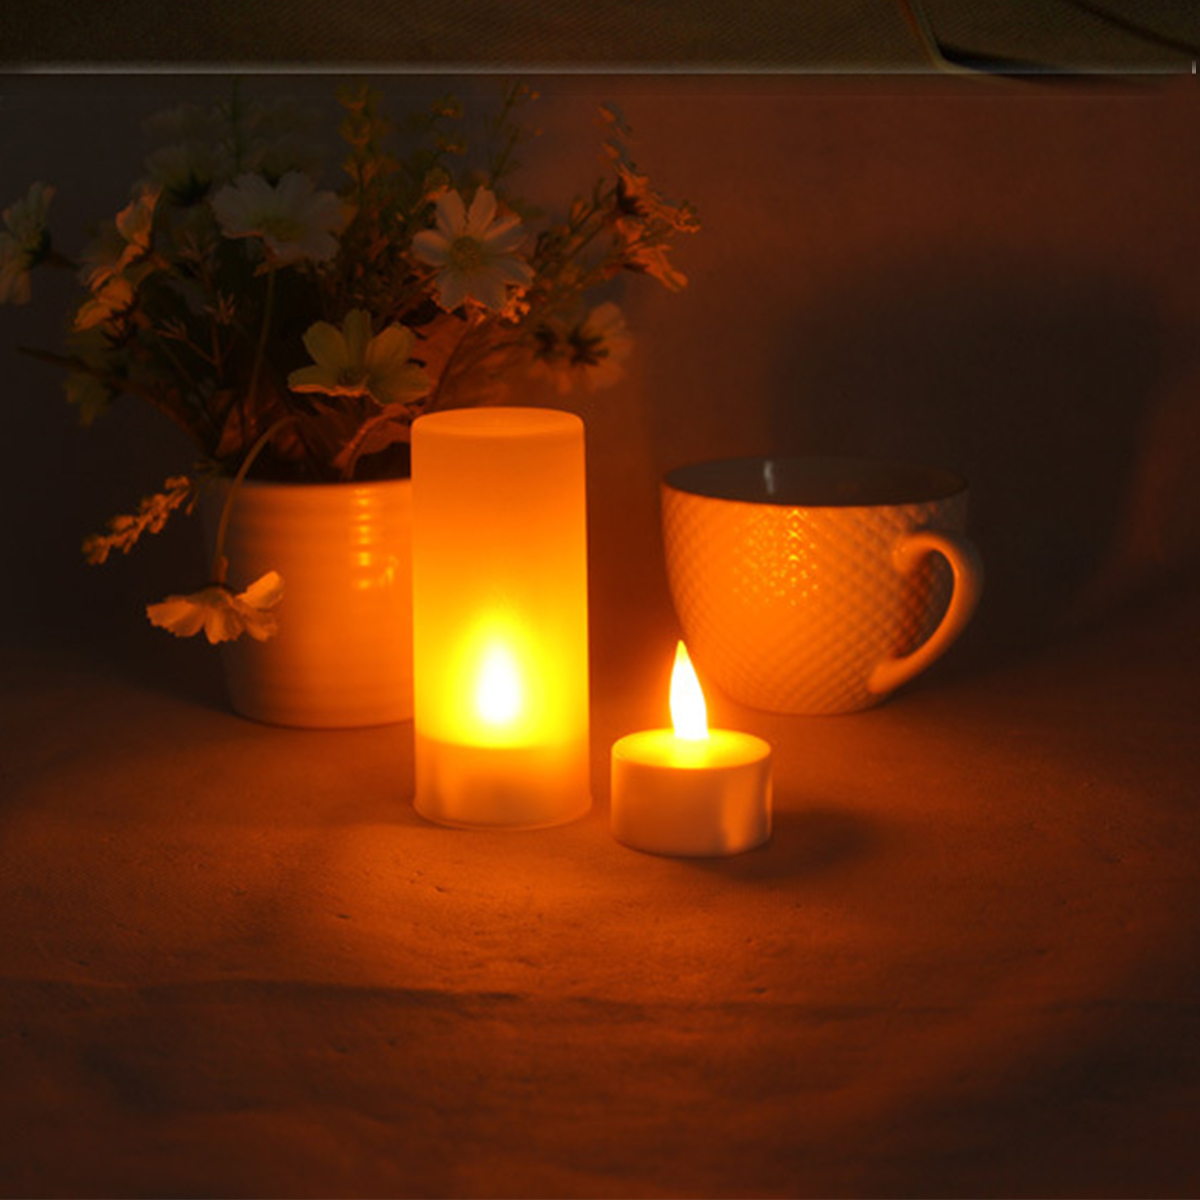 12PCS-Flameless-LED-Candle-Light-Rechargeable-Flickering-Tea-Lamp-for-Birthday-Party-US-Plug-AC110V-1675885-5